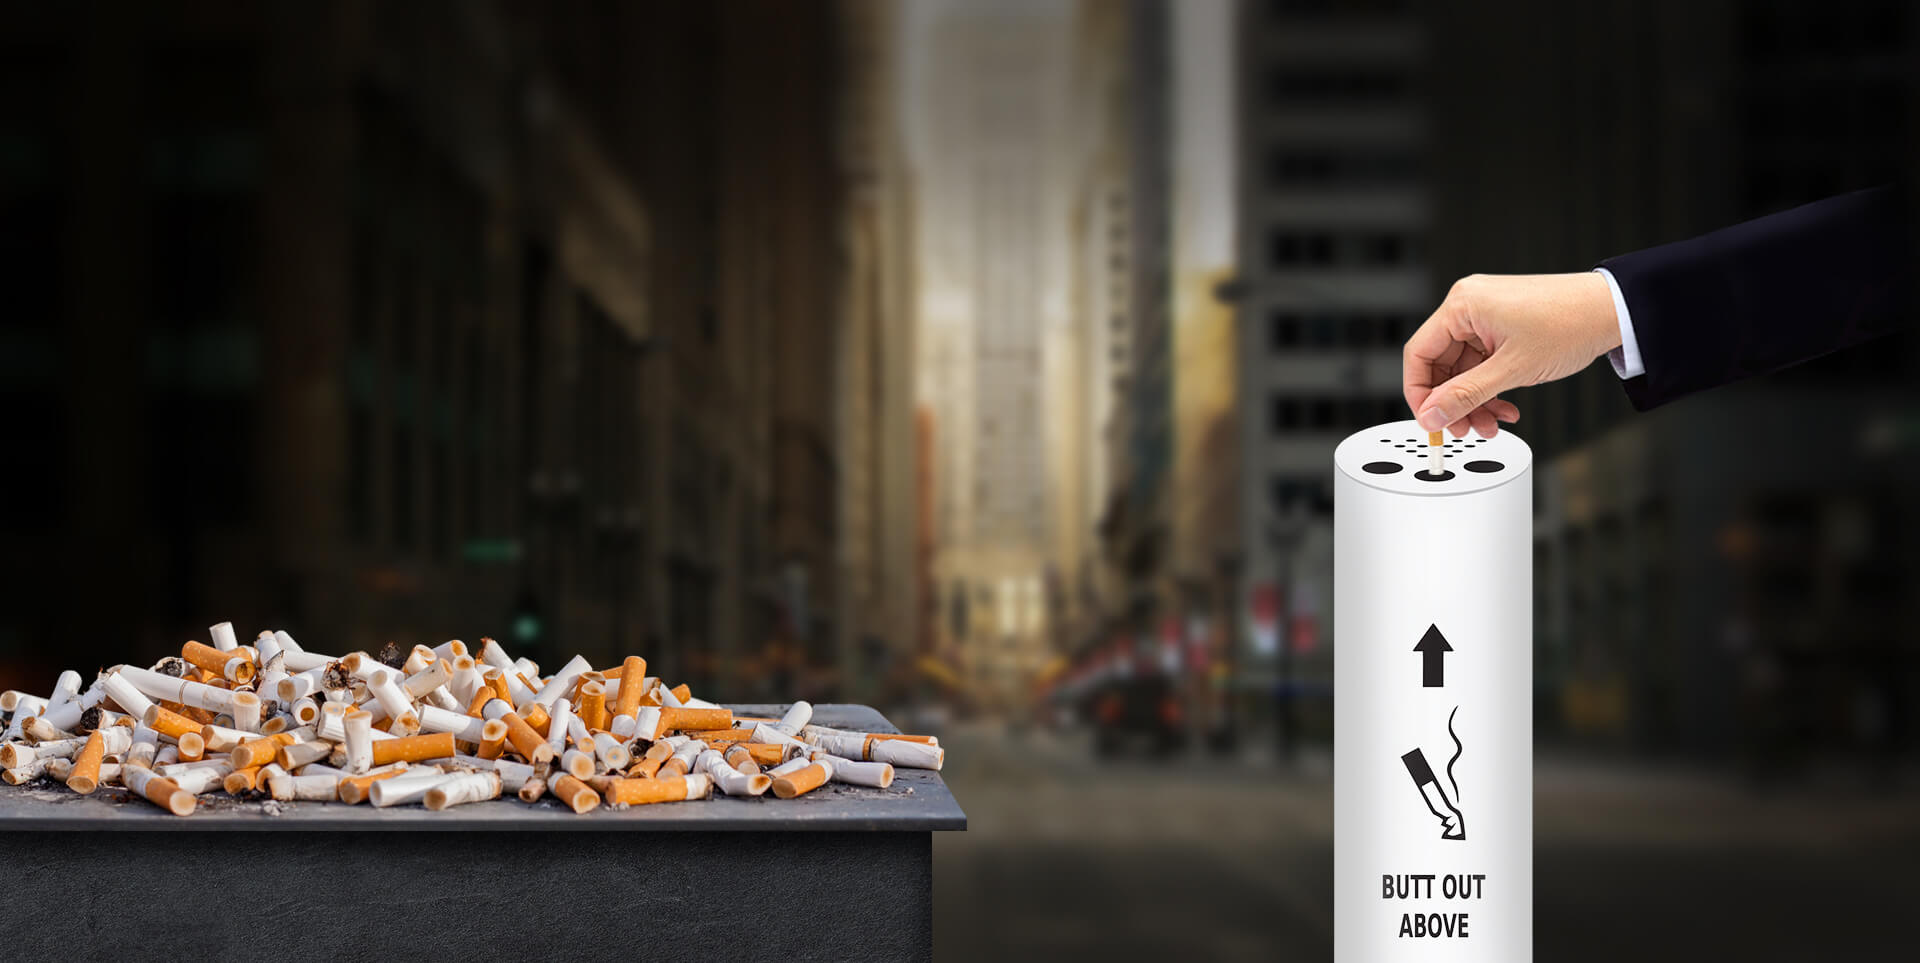 Buffindia- an end to end solution to cigarette wasteCigarette Butts- Litter Free India Number one most littered waste in India